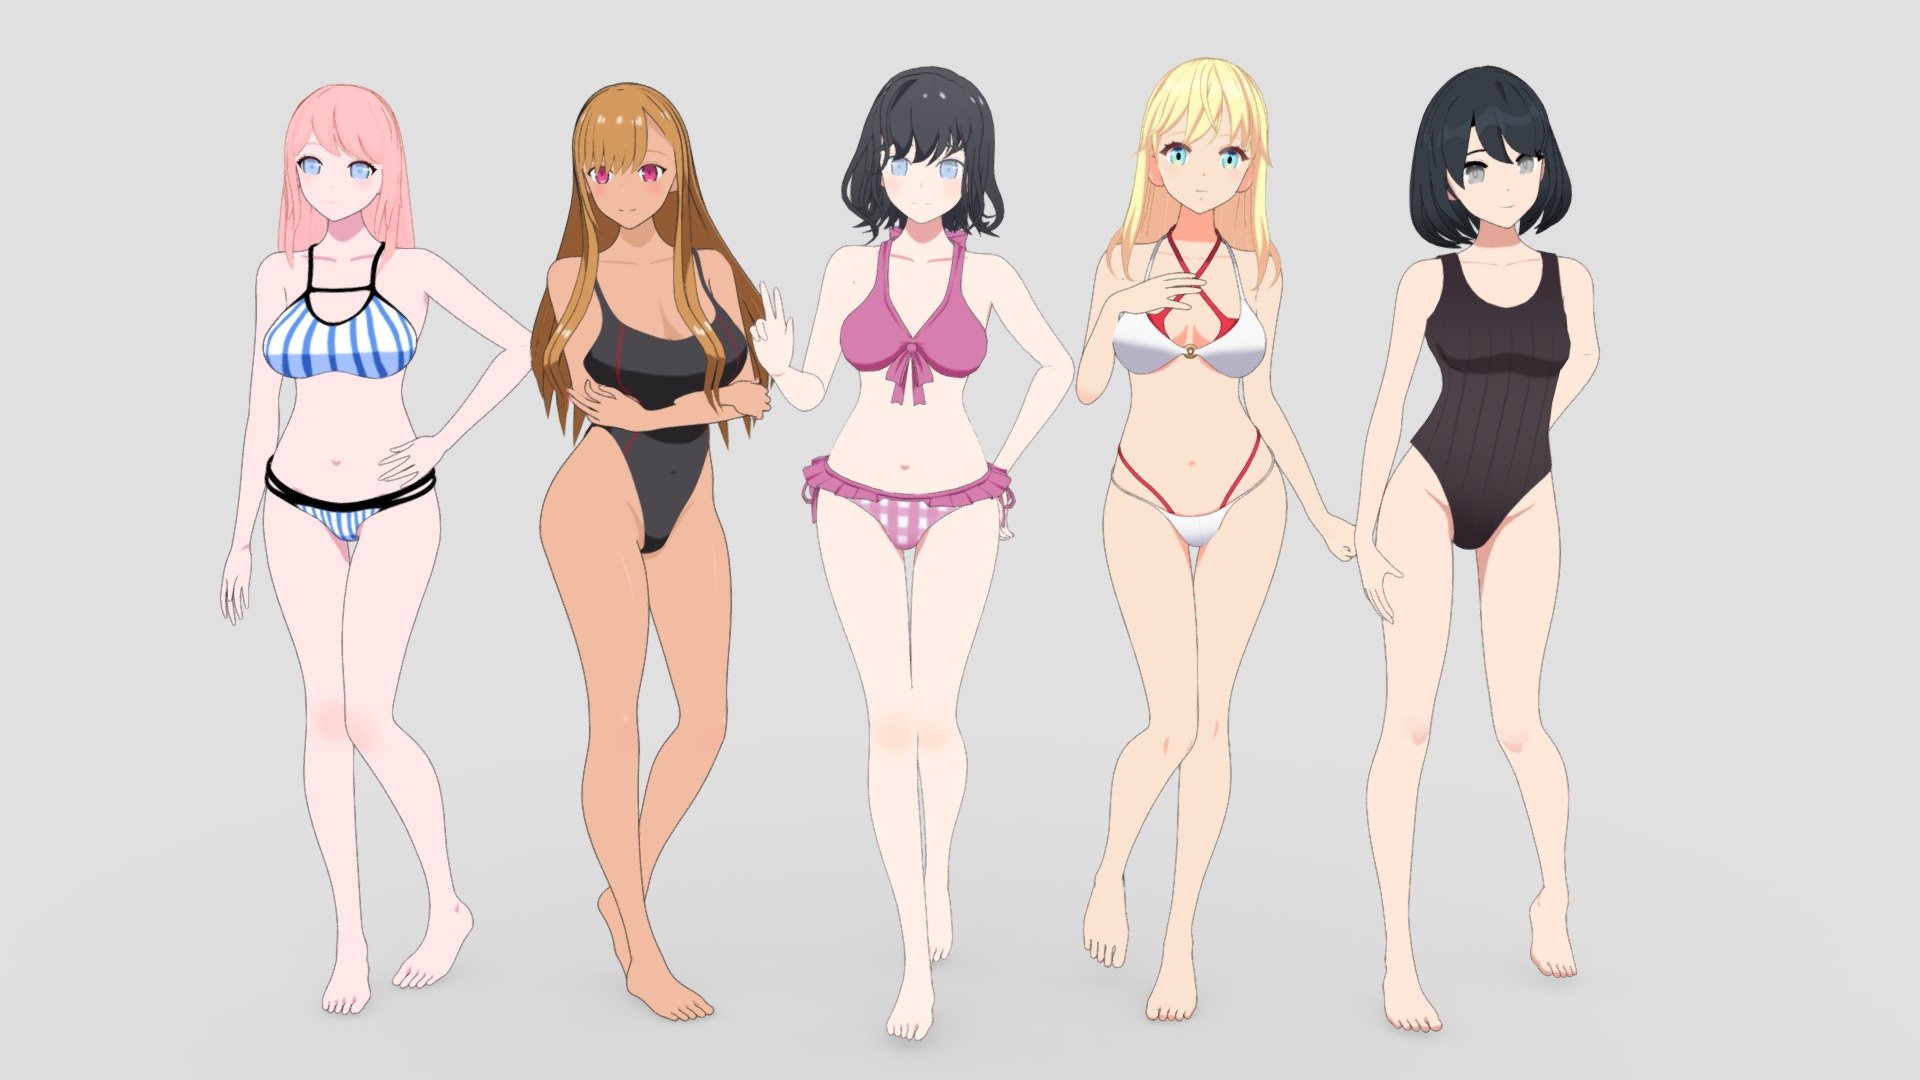 Meet 5 bikini-clad 3D characters - Sakura, Aiko, Hana, Yuki, and Emi. Each model brings its own essence and charm, ready to enhance your creations. Bring life to your summer animations with these captivating characters.

Female Anime Student 3D Collection

All contains:




.blend (Blender source)

textures(2x bikinis)

rigged (auto rig pro)

On/Off outline material

Solo version:




Sakura

Aiko

Hana

Yuki

Emi

Rigged:





 - Summer Collection: 5 Anime Bikini 3D Characters - Buy Royalty Free 3D model by LessaB3D 3d model